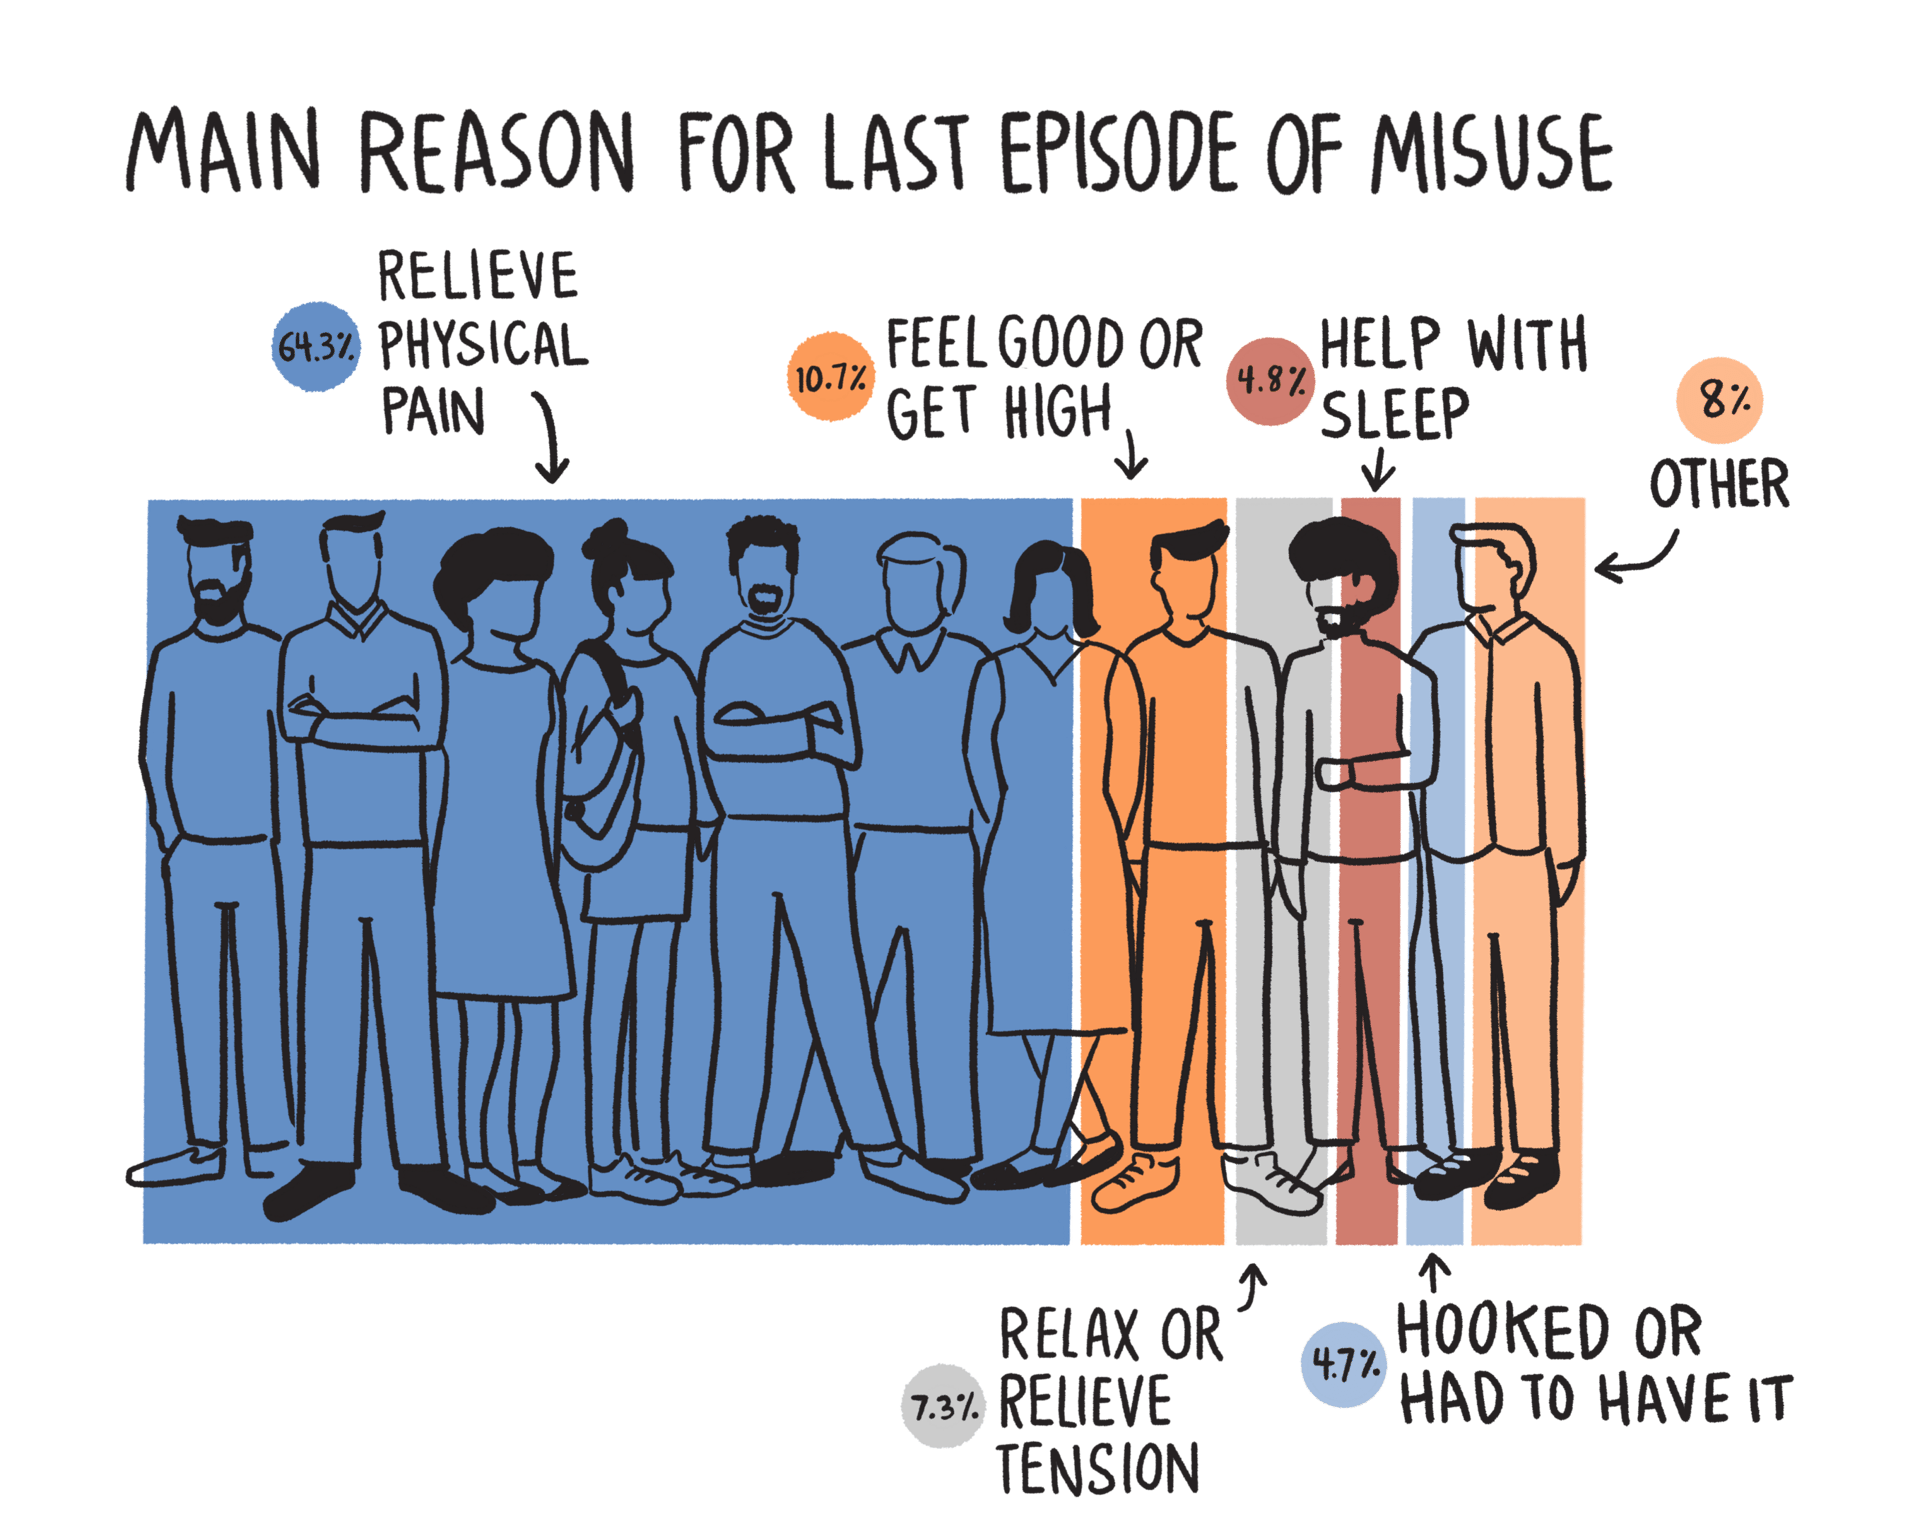 Bar char with silhouettes of ten people in the background. The header is Main Reason for Last Episode of Misuse. 64.3% of people last misused to relieve physical pain, 10.7% did it to feel good or get high, 7.3% to relax or relieve tension, 4.8% to help with sleep, 4.7% because they&#x27;re hooked or had to have it, and 8% for other reasons.